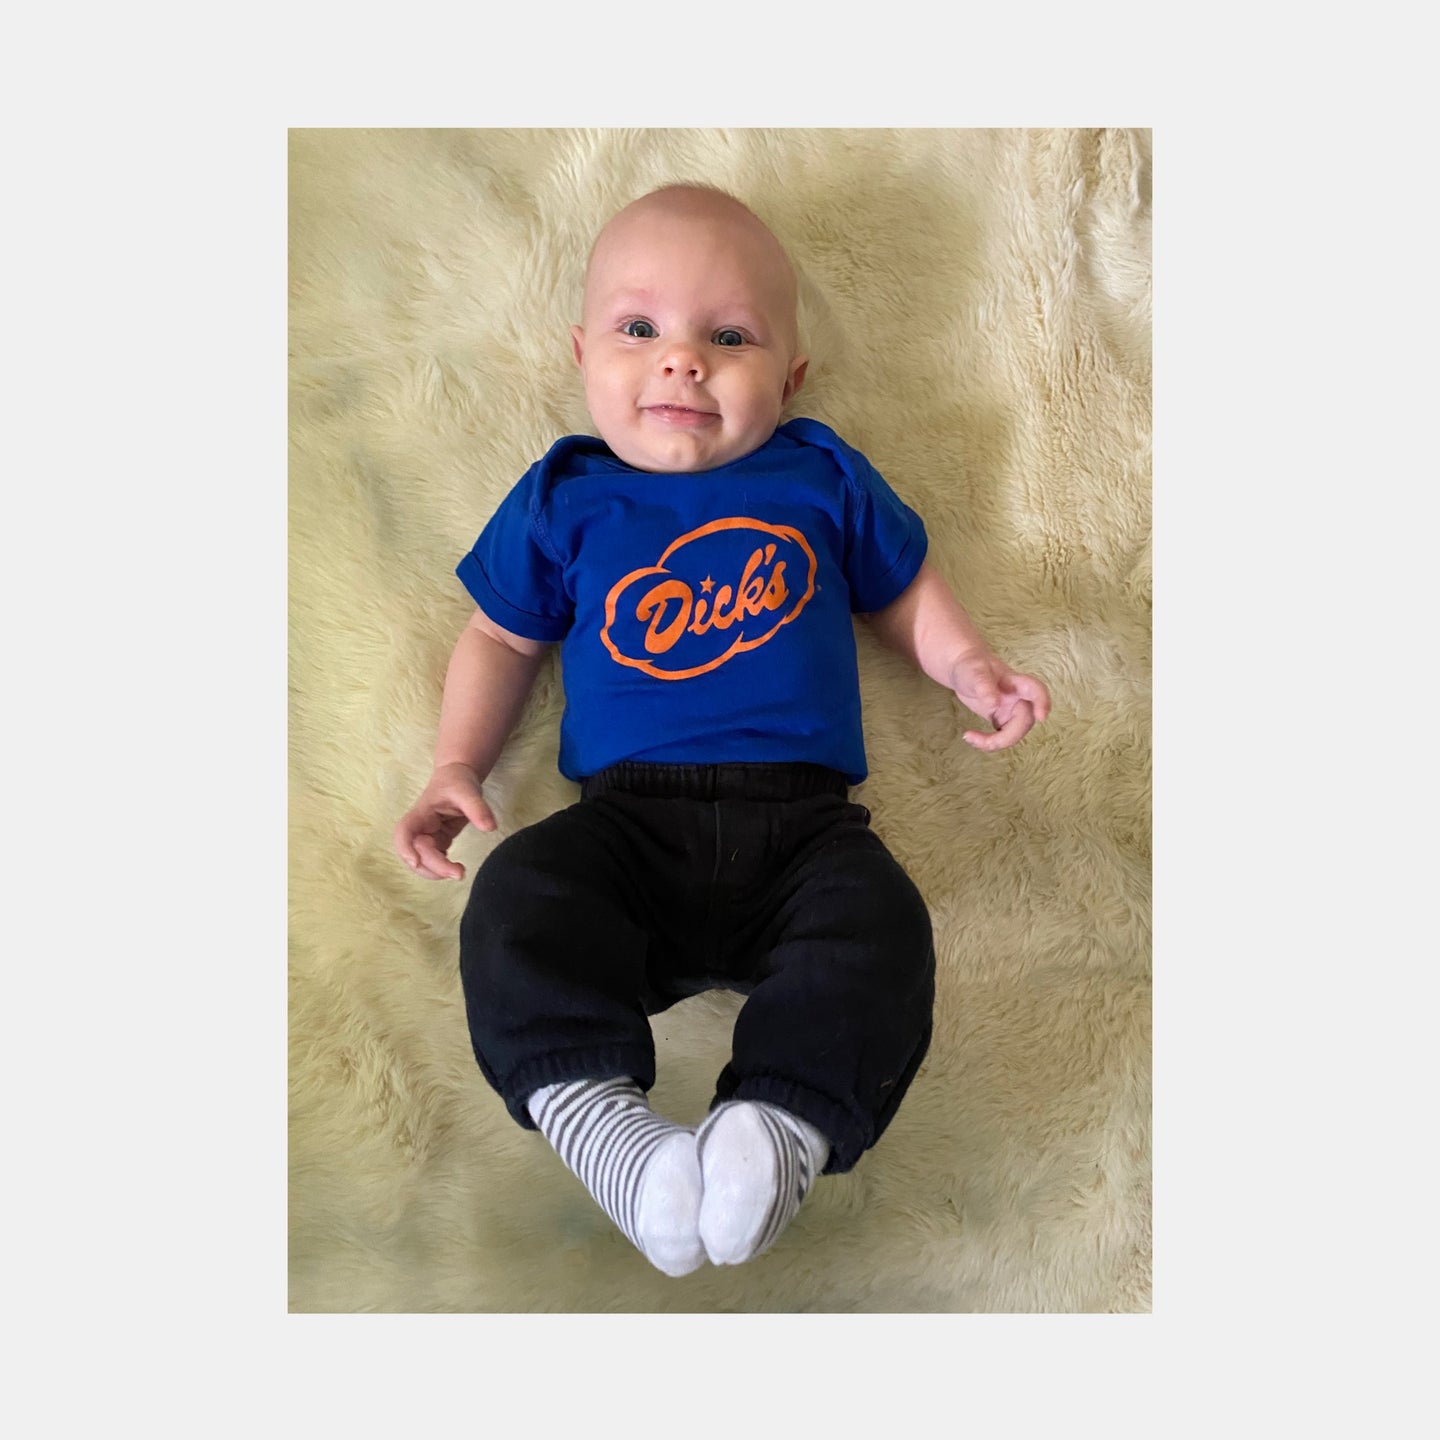 Baby wearing royal blue onesie with Dick's Drive-In orange cloud logo on front and black pants.